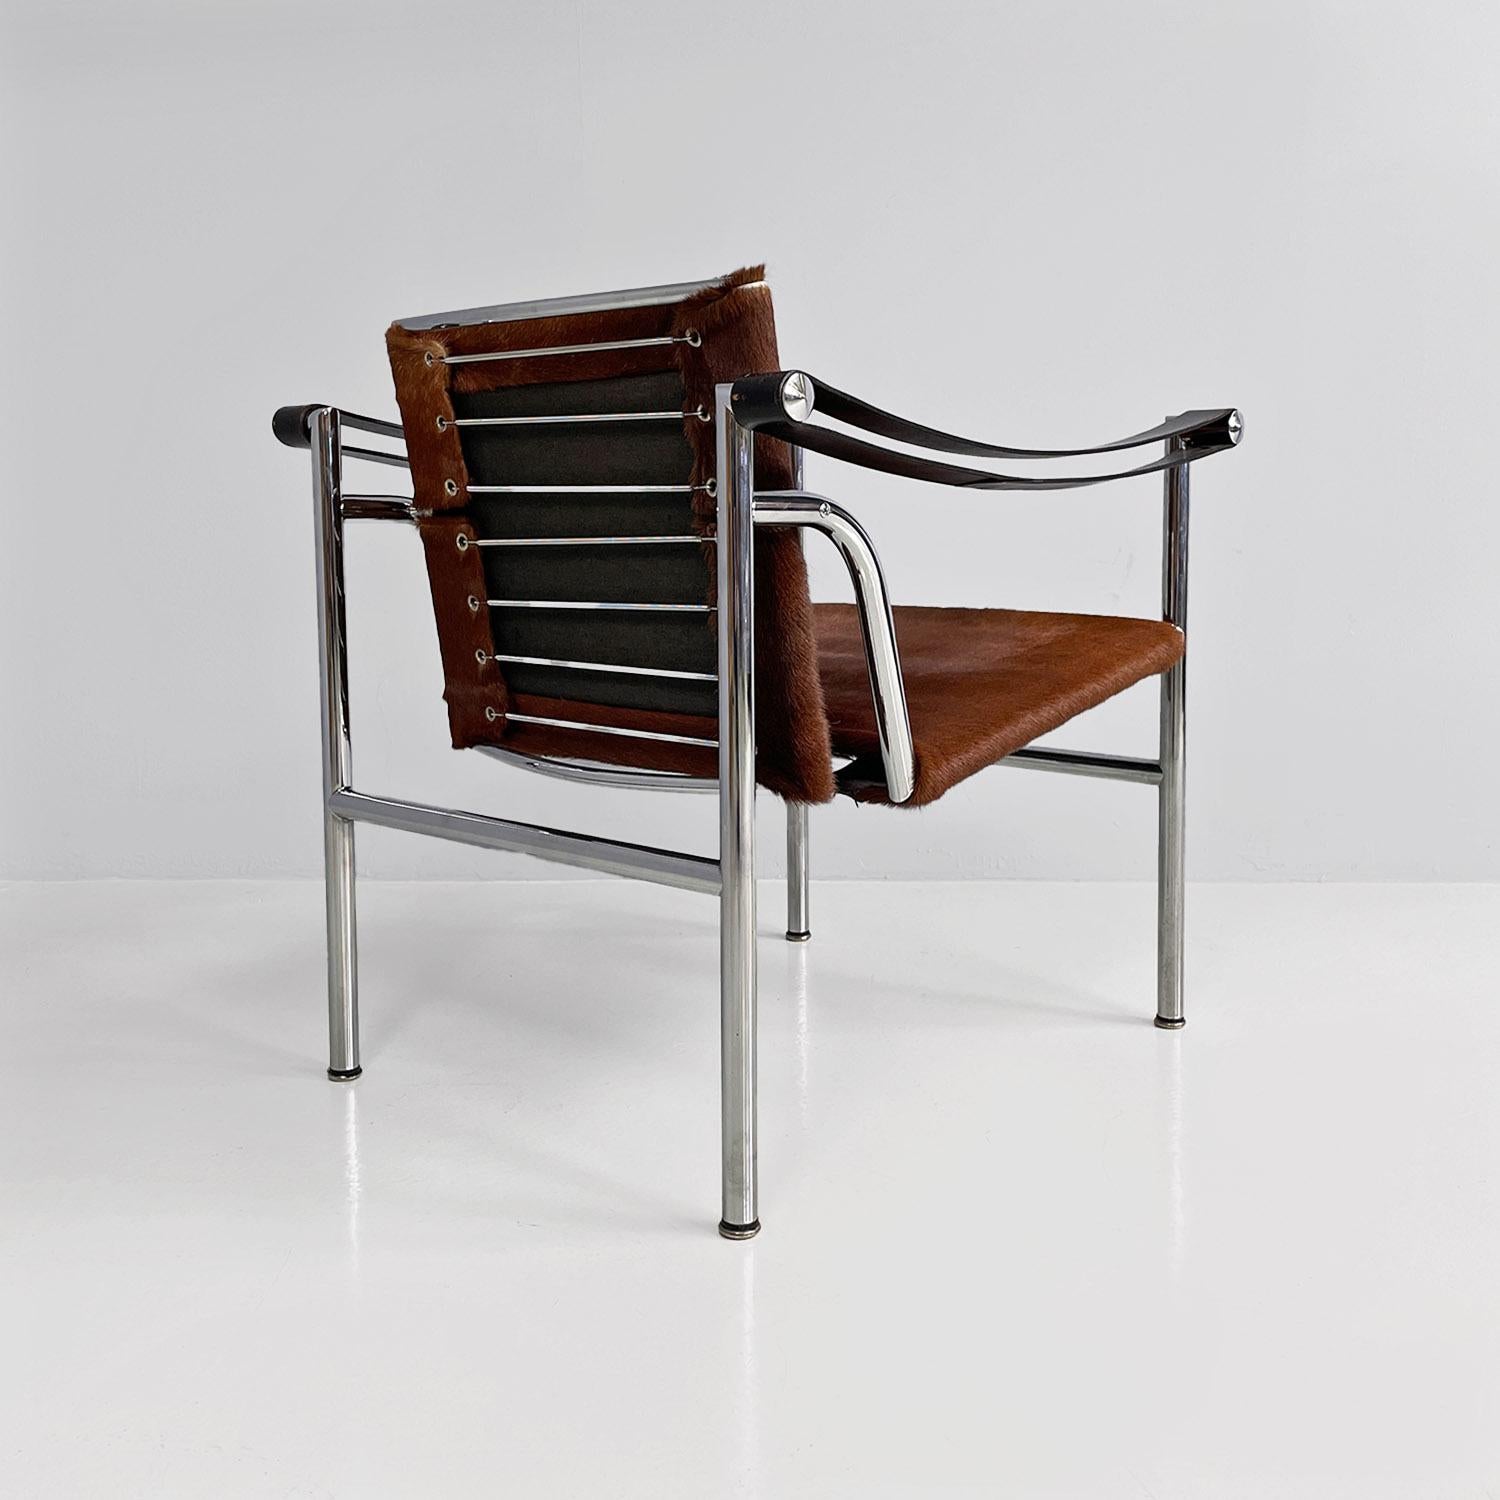 Italian modern LC1 armchair, Le Corbusier, Jeanneret and Perriand, Cassina 1960s For Sale 1